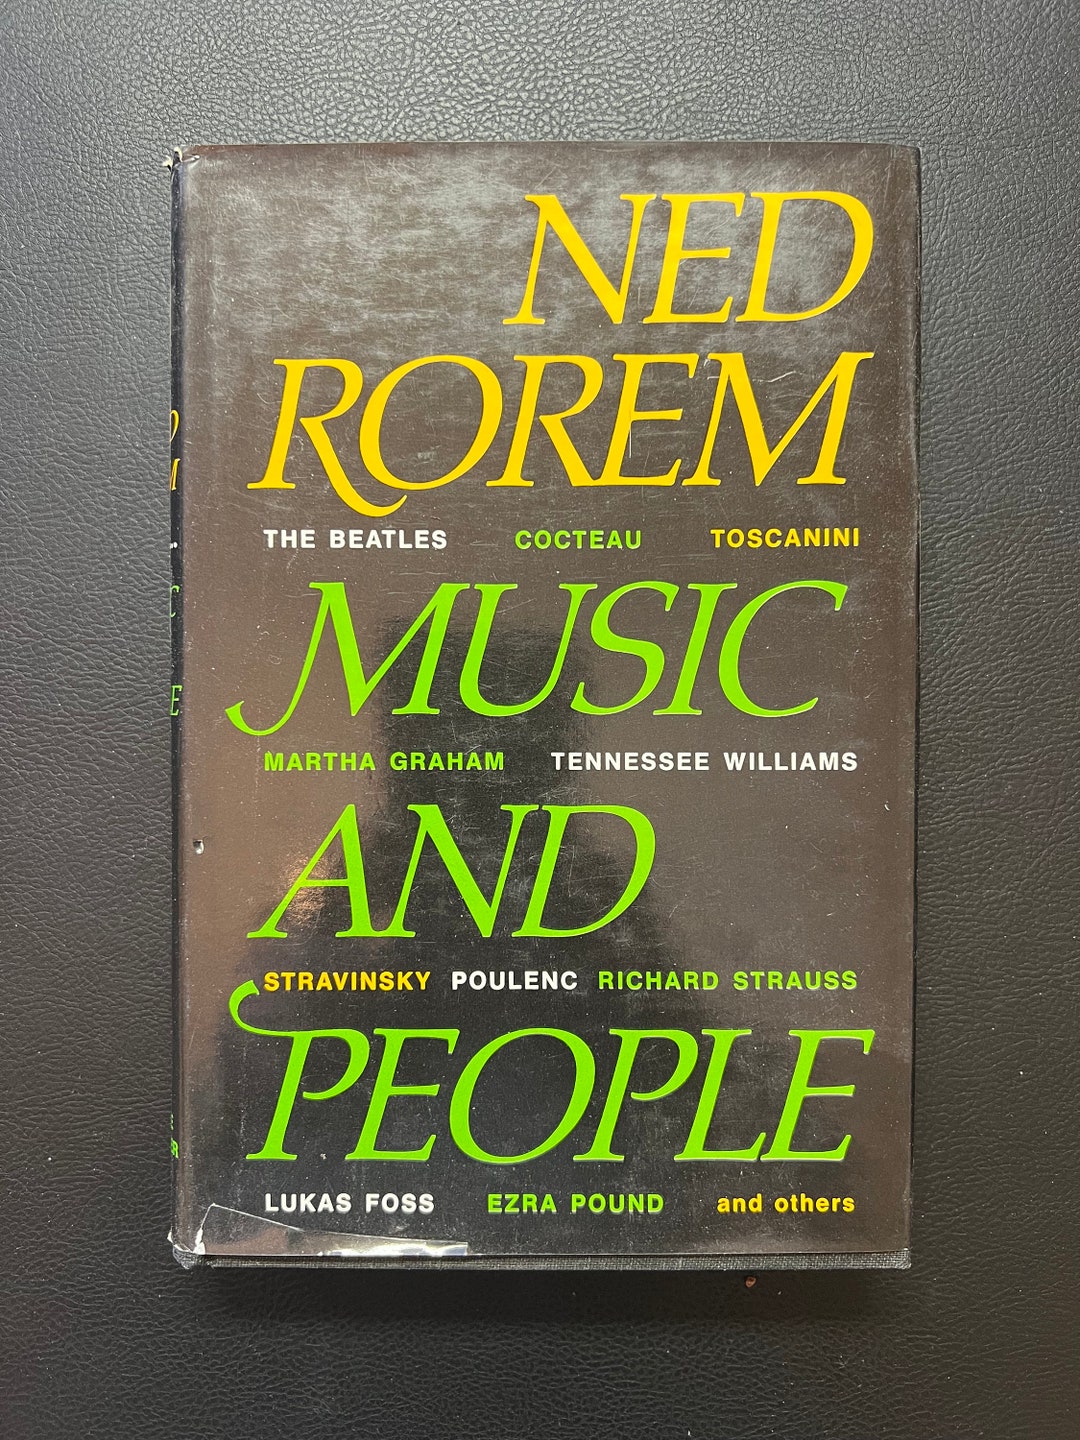 Music and People by Ned Rorem copyright 1968 - Etsy